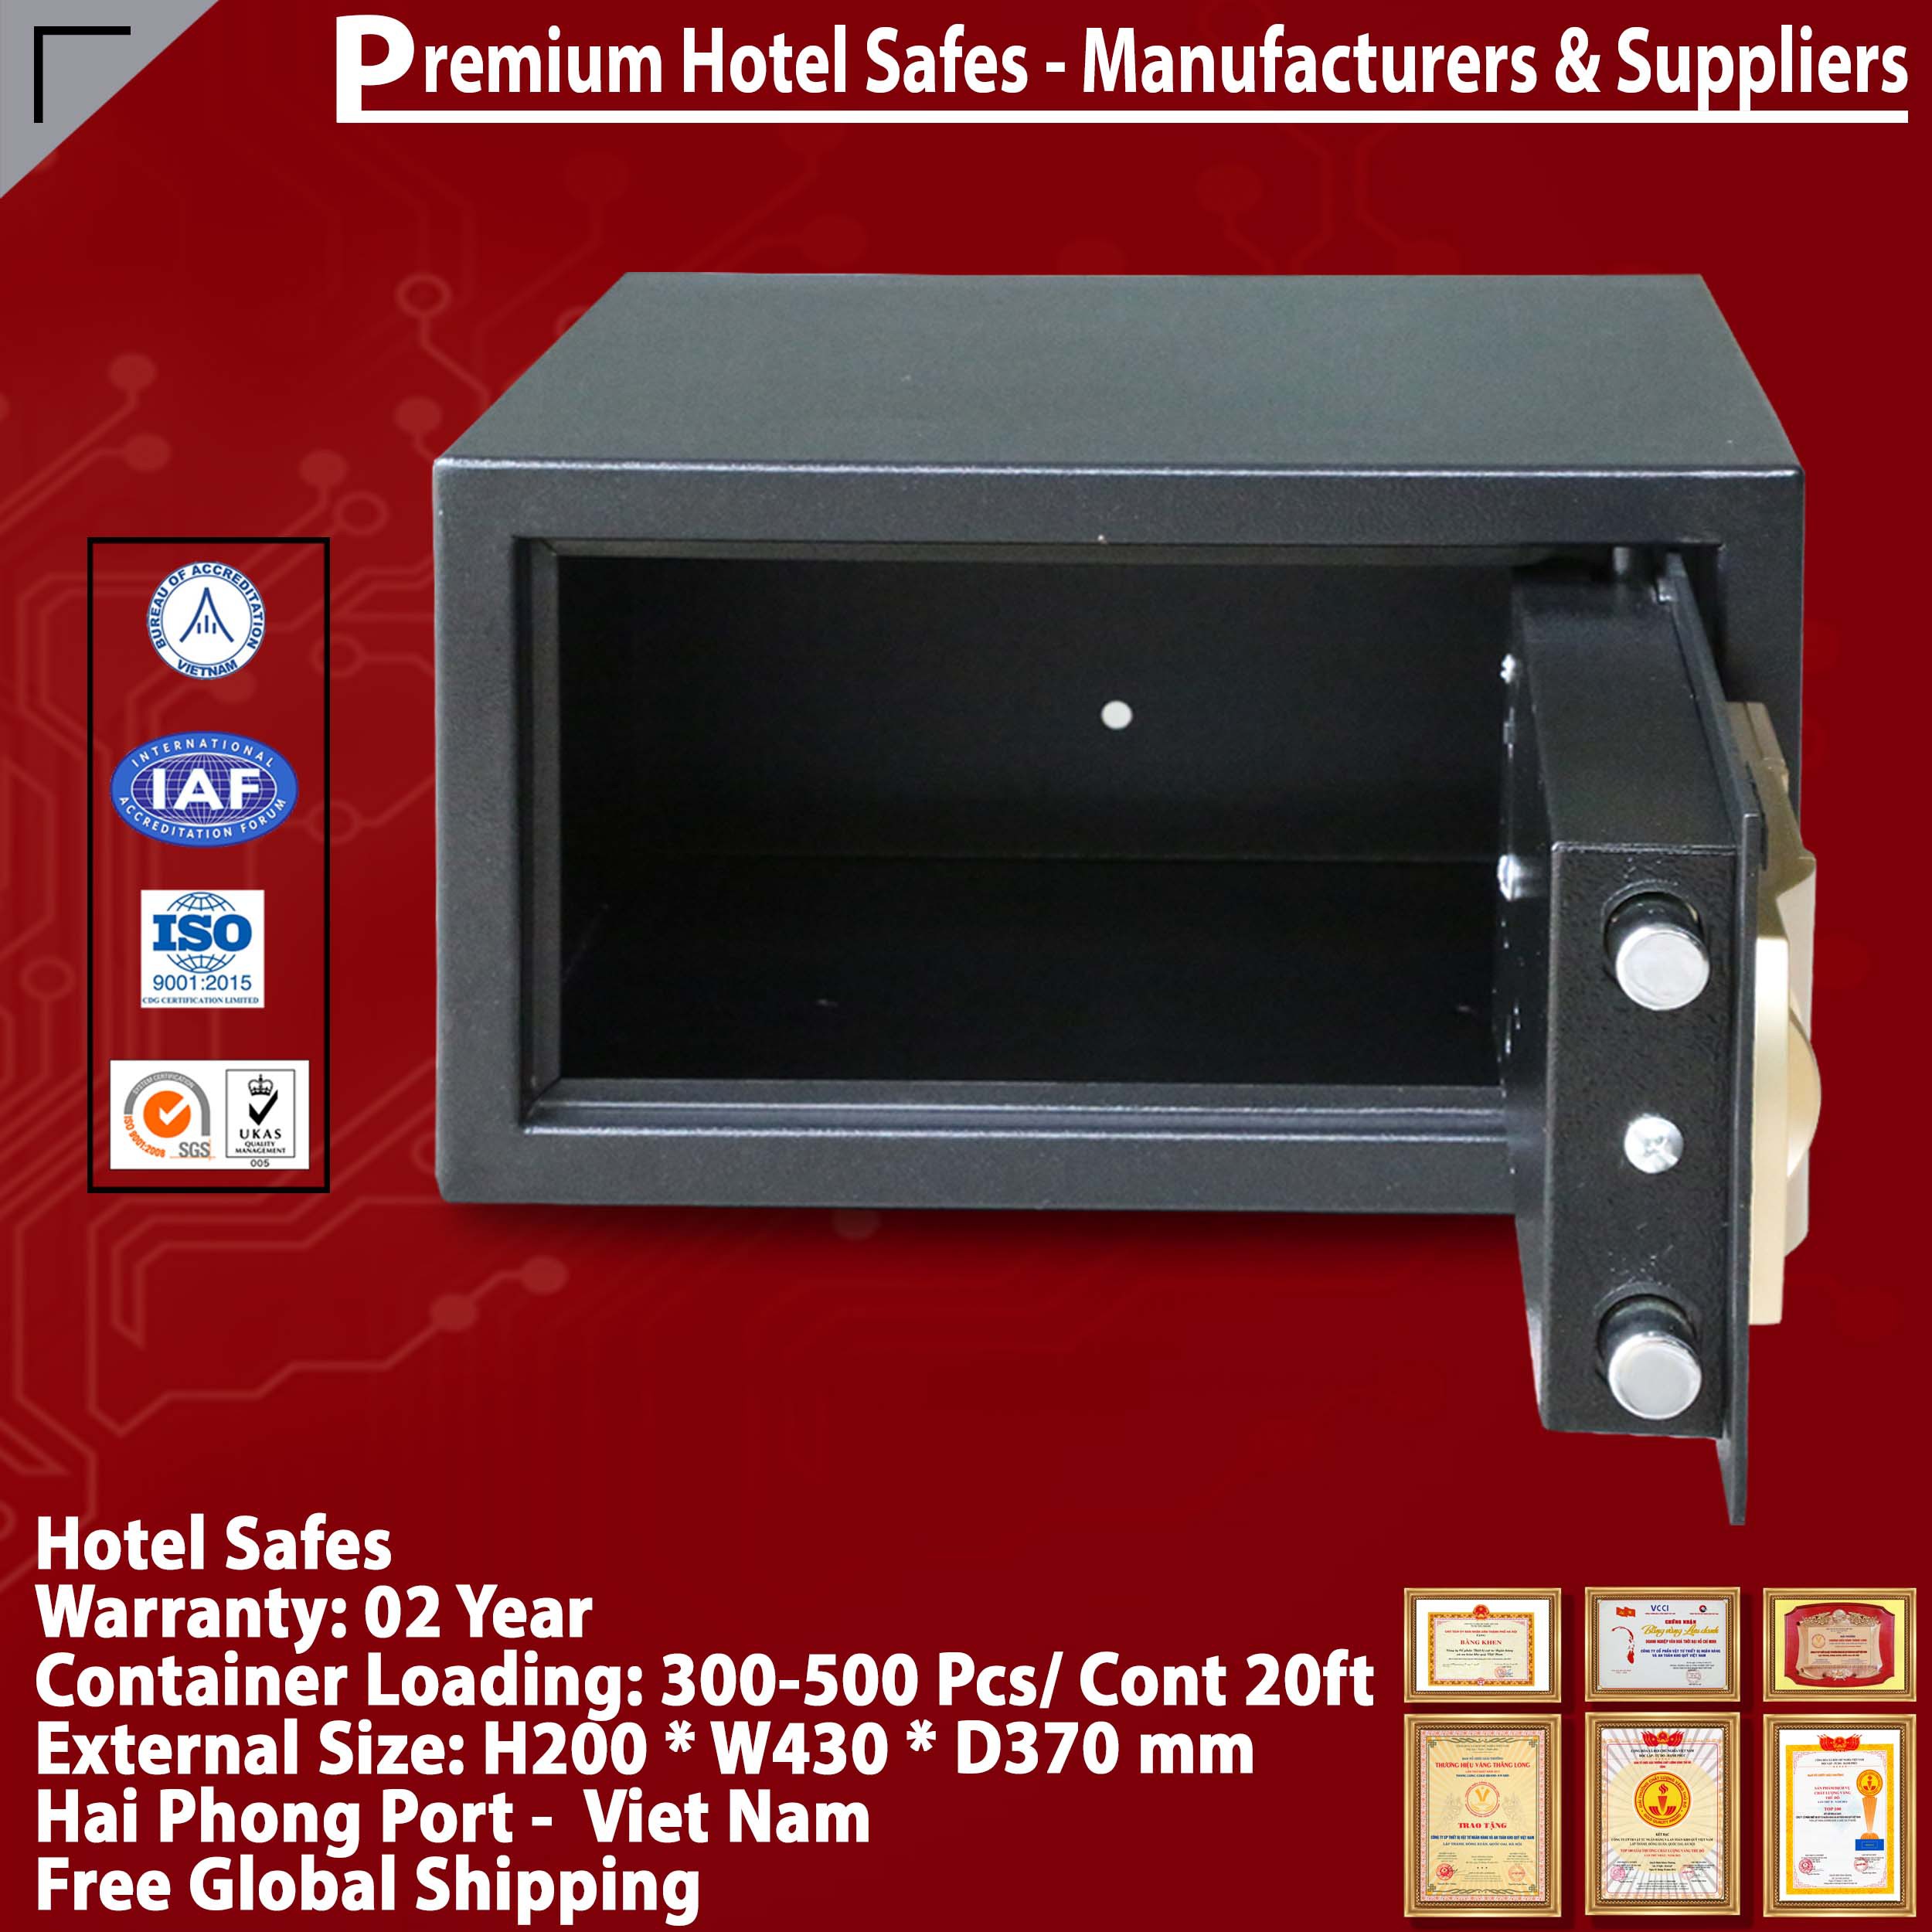 Hotel Safe Dimensions Made In Viet Nam